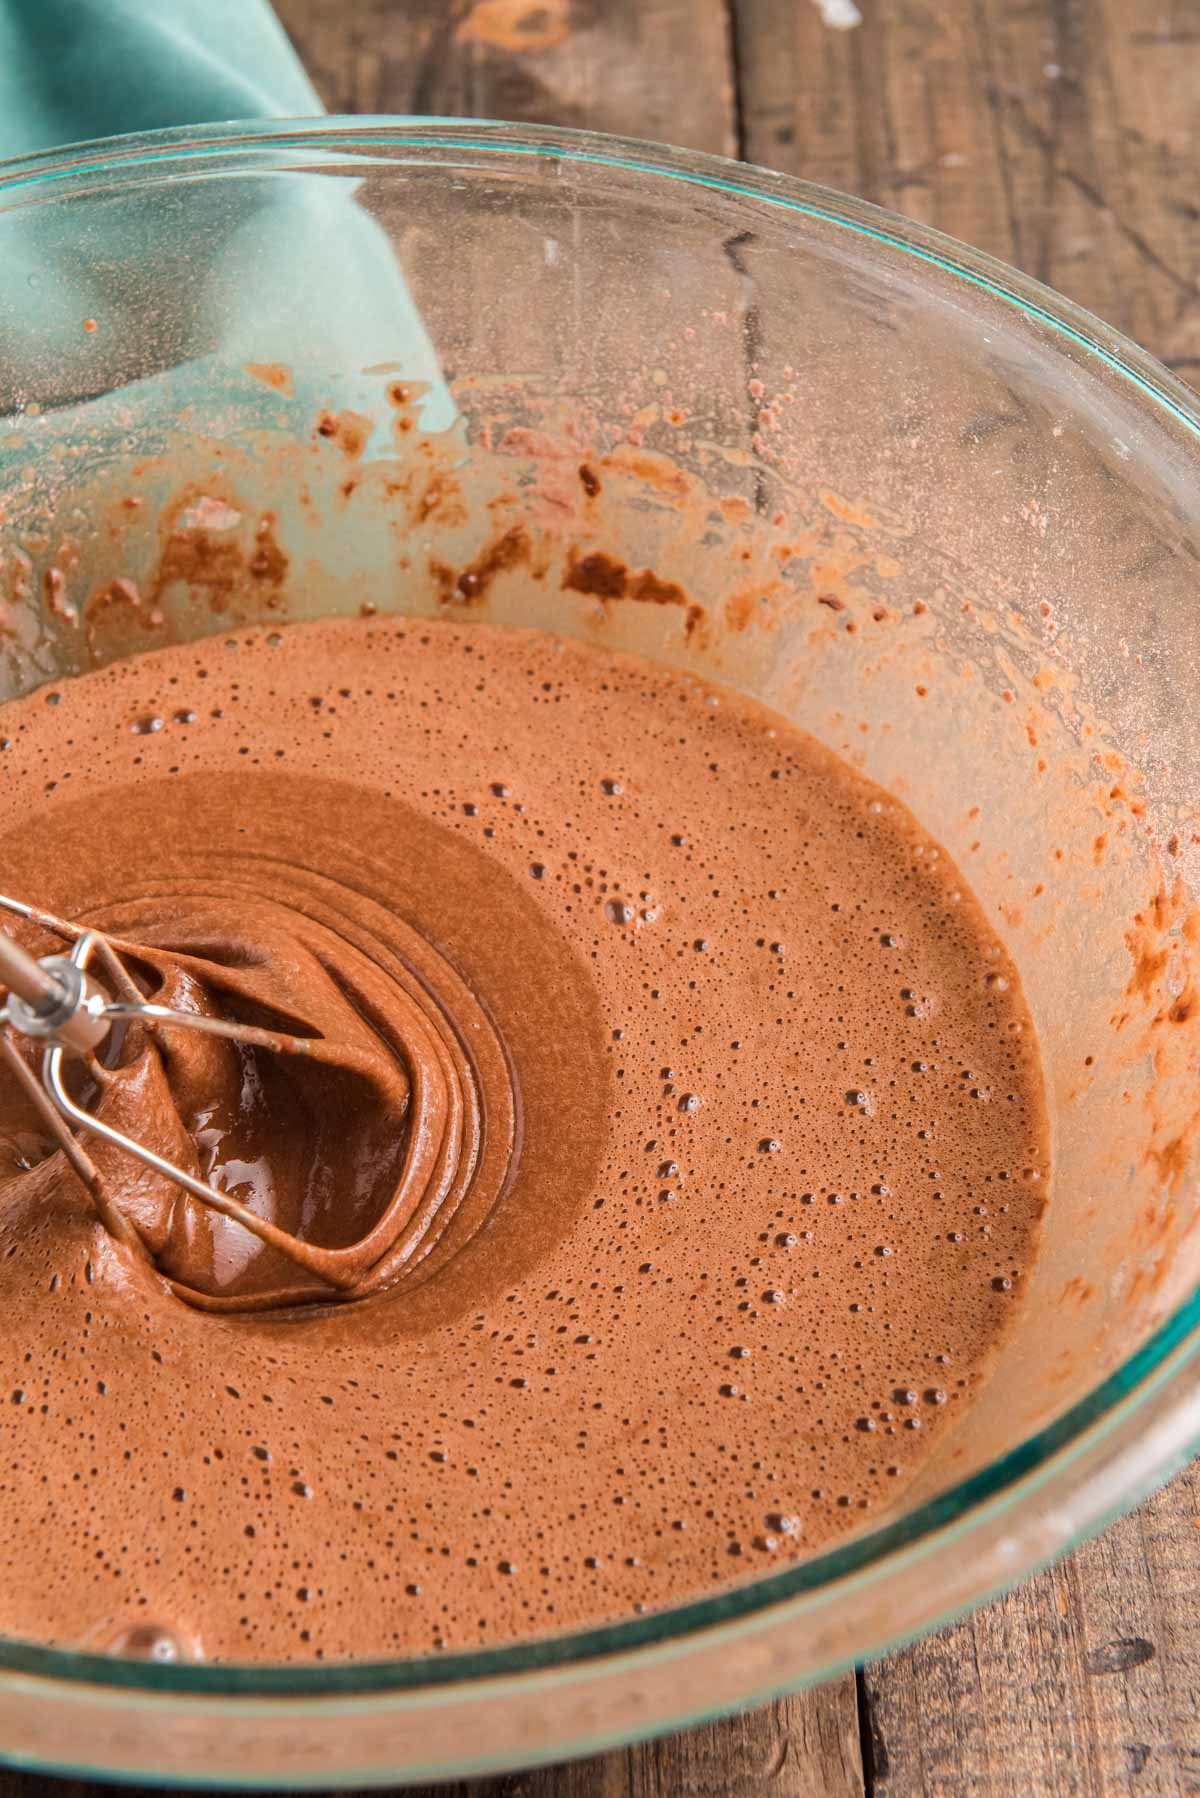 Chocolate cake batter in a glass mixing bowl.